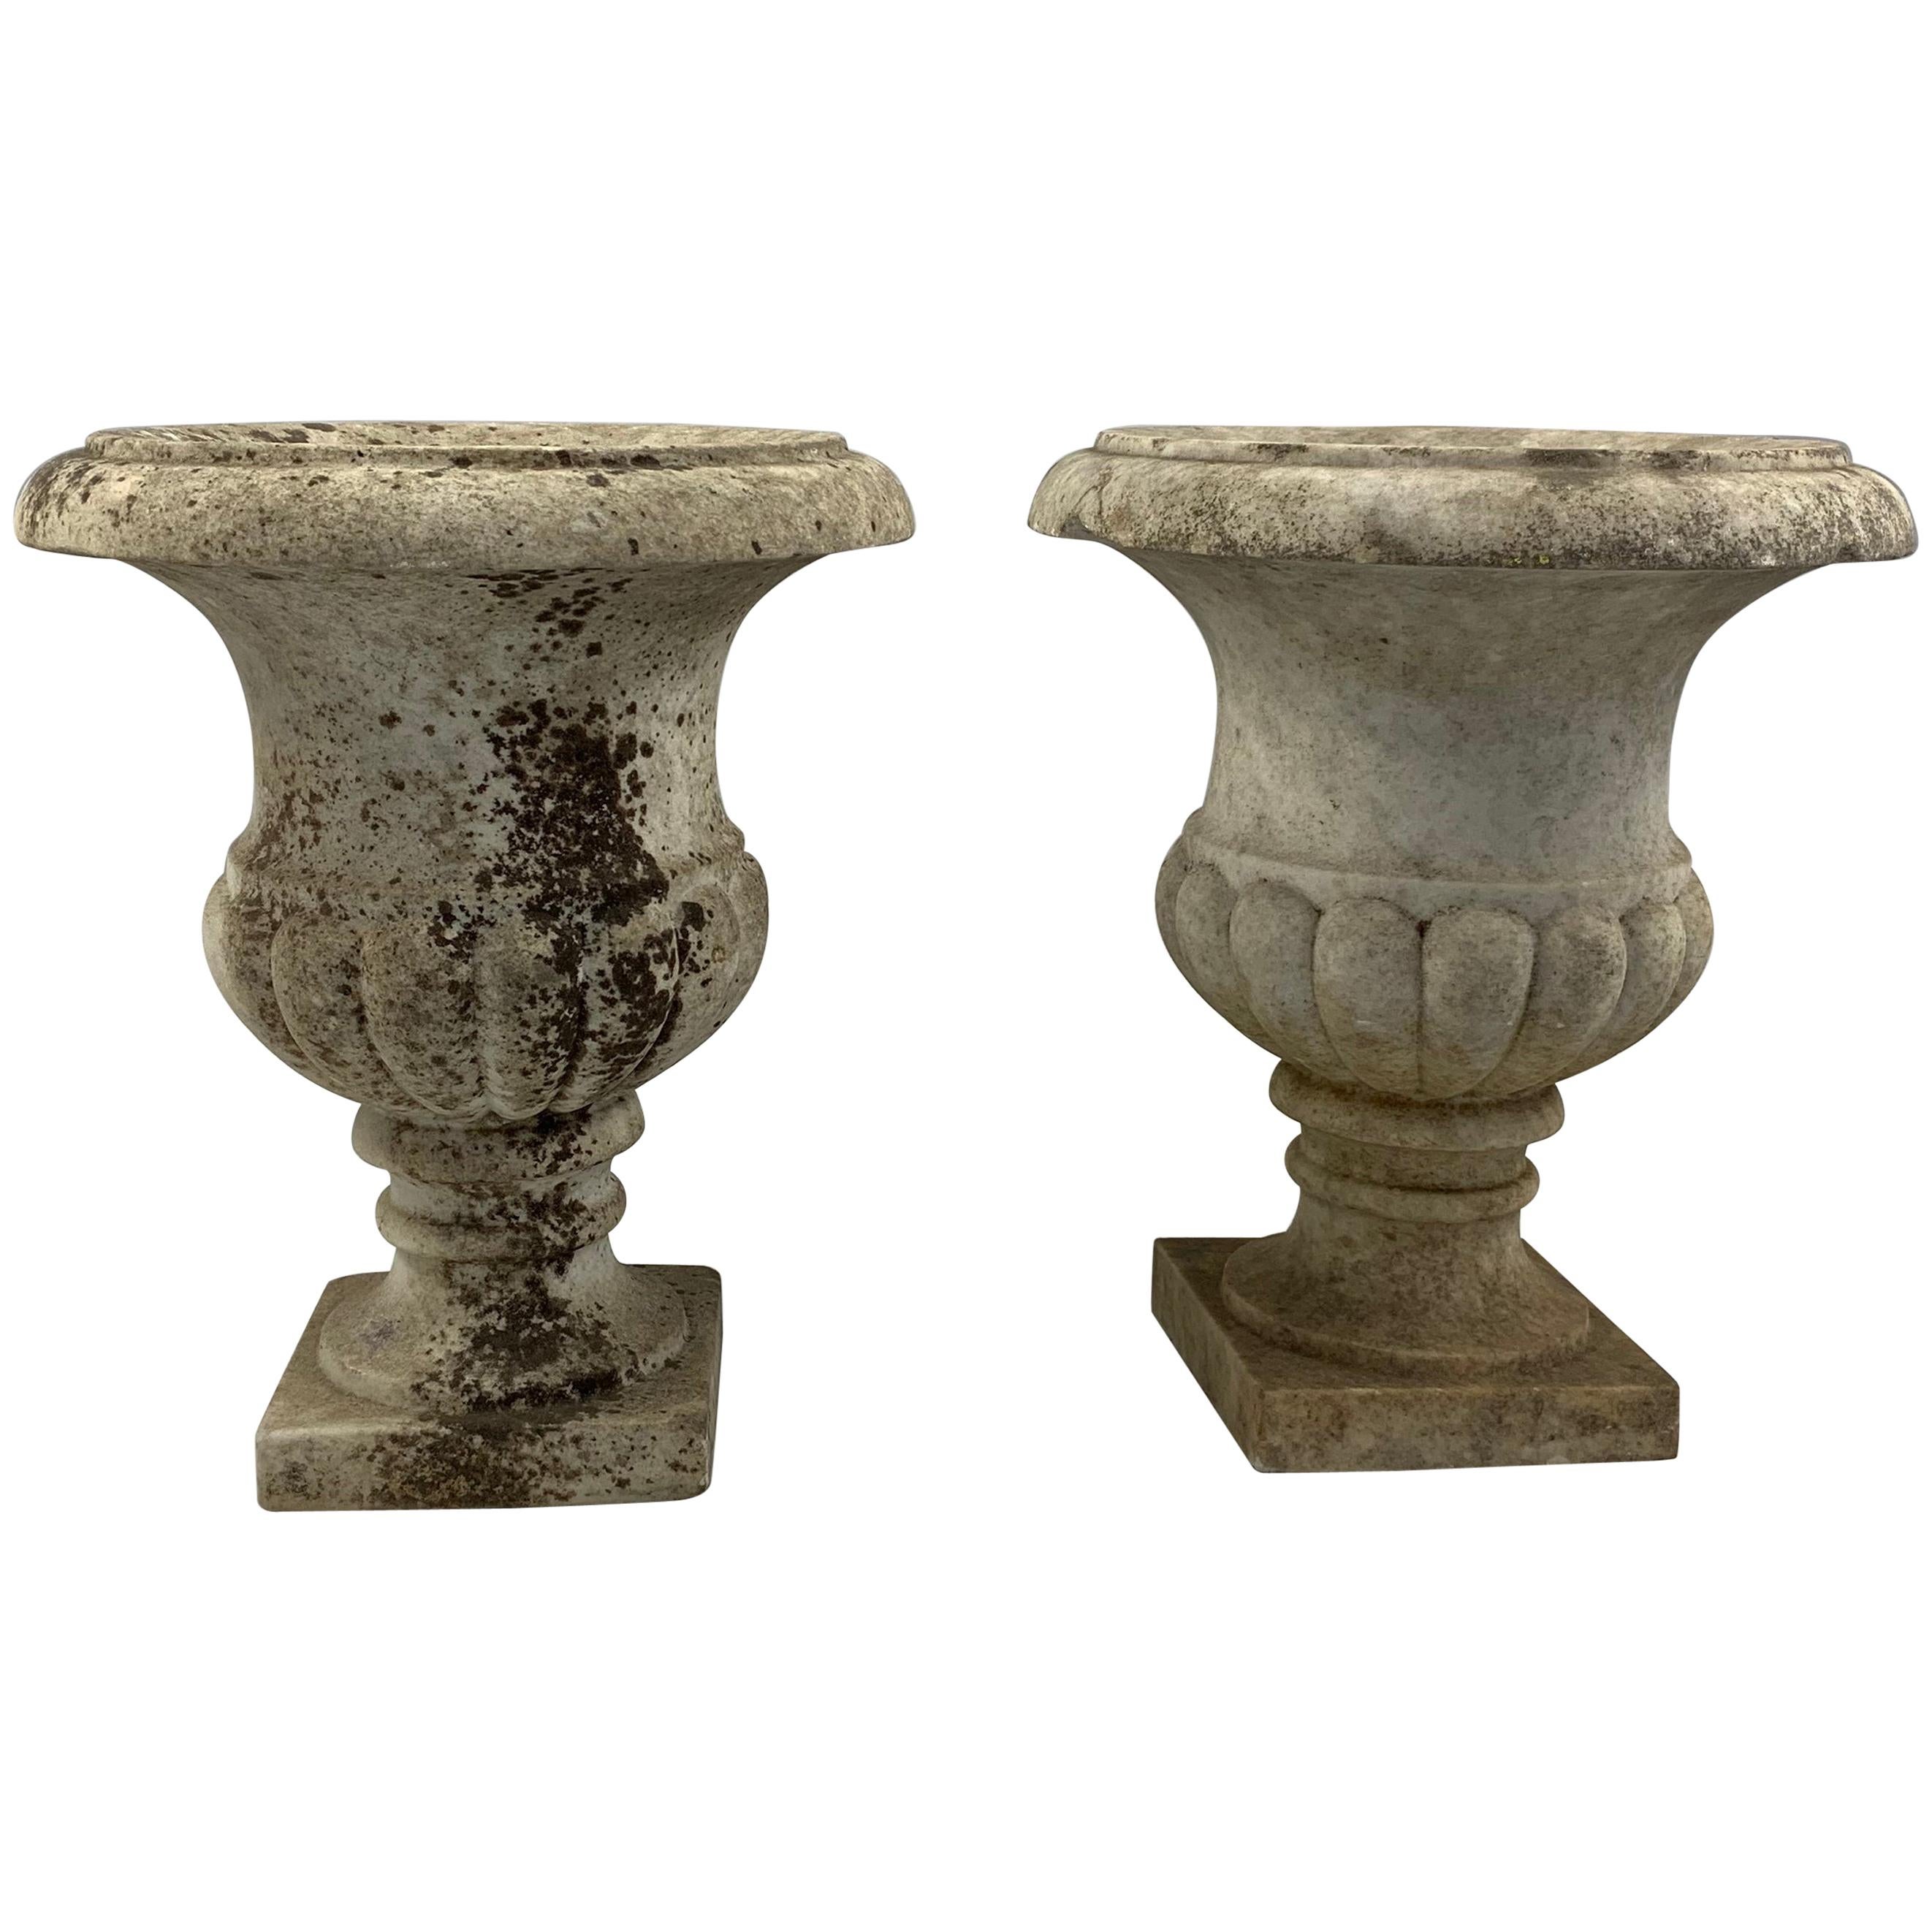 19th Century Pair of Carrara Marble Campana Shaped Garden Urns For Sale